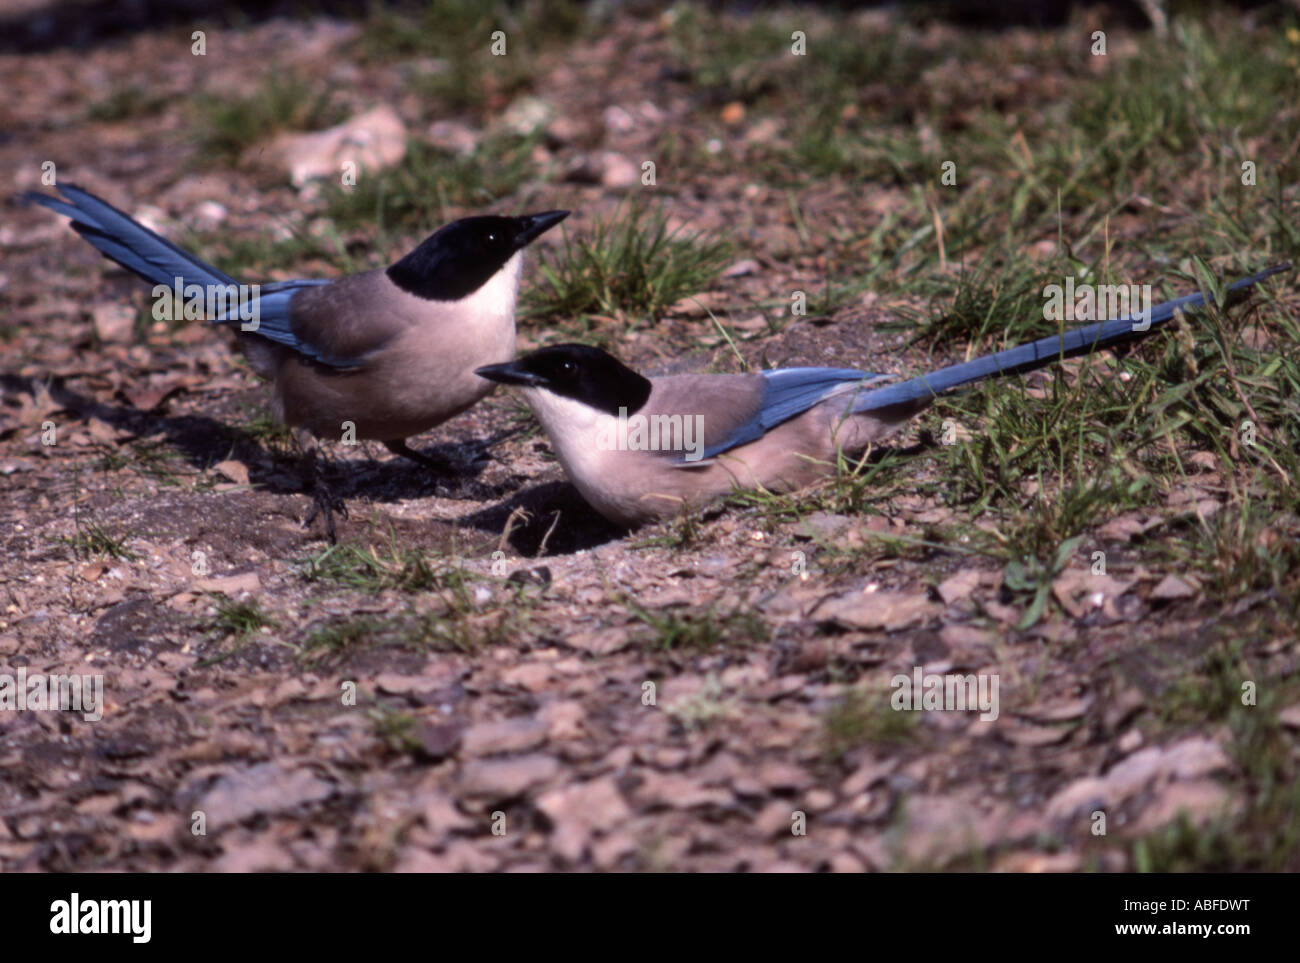 Azure winged magpies on ground Portugal Stock Photo